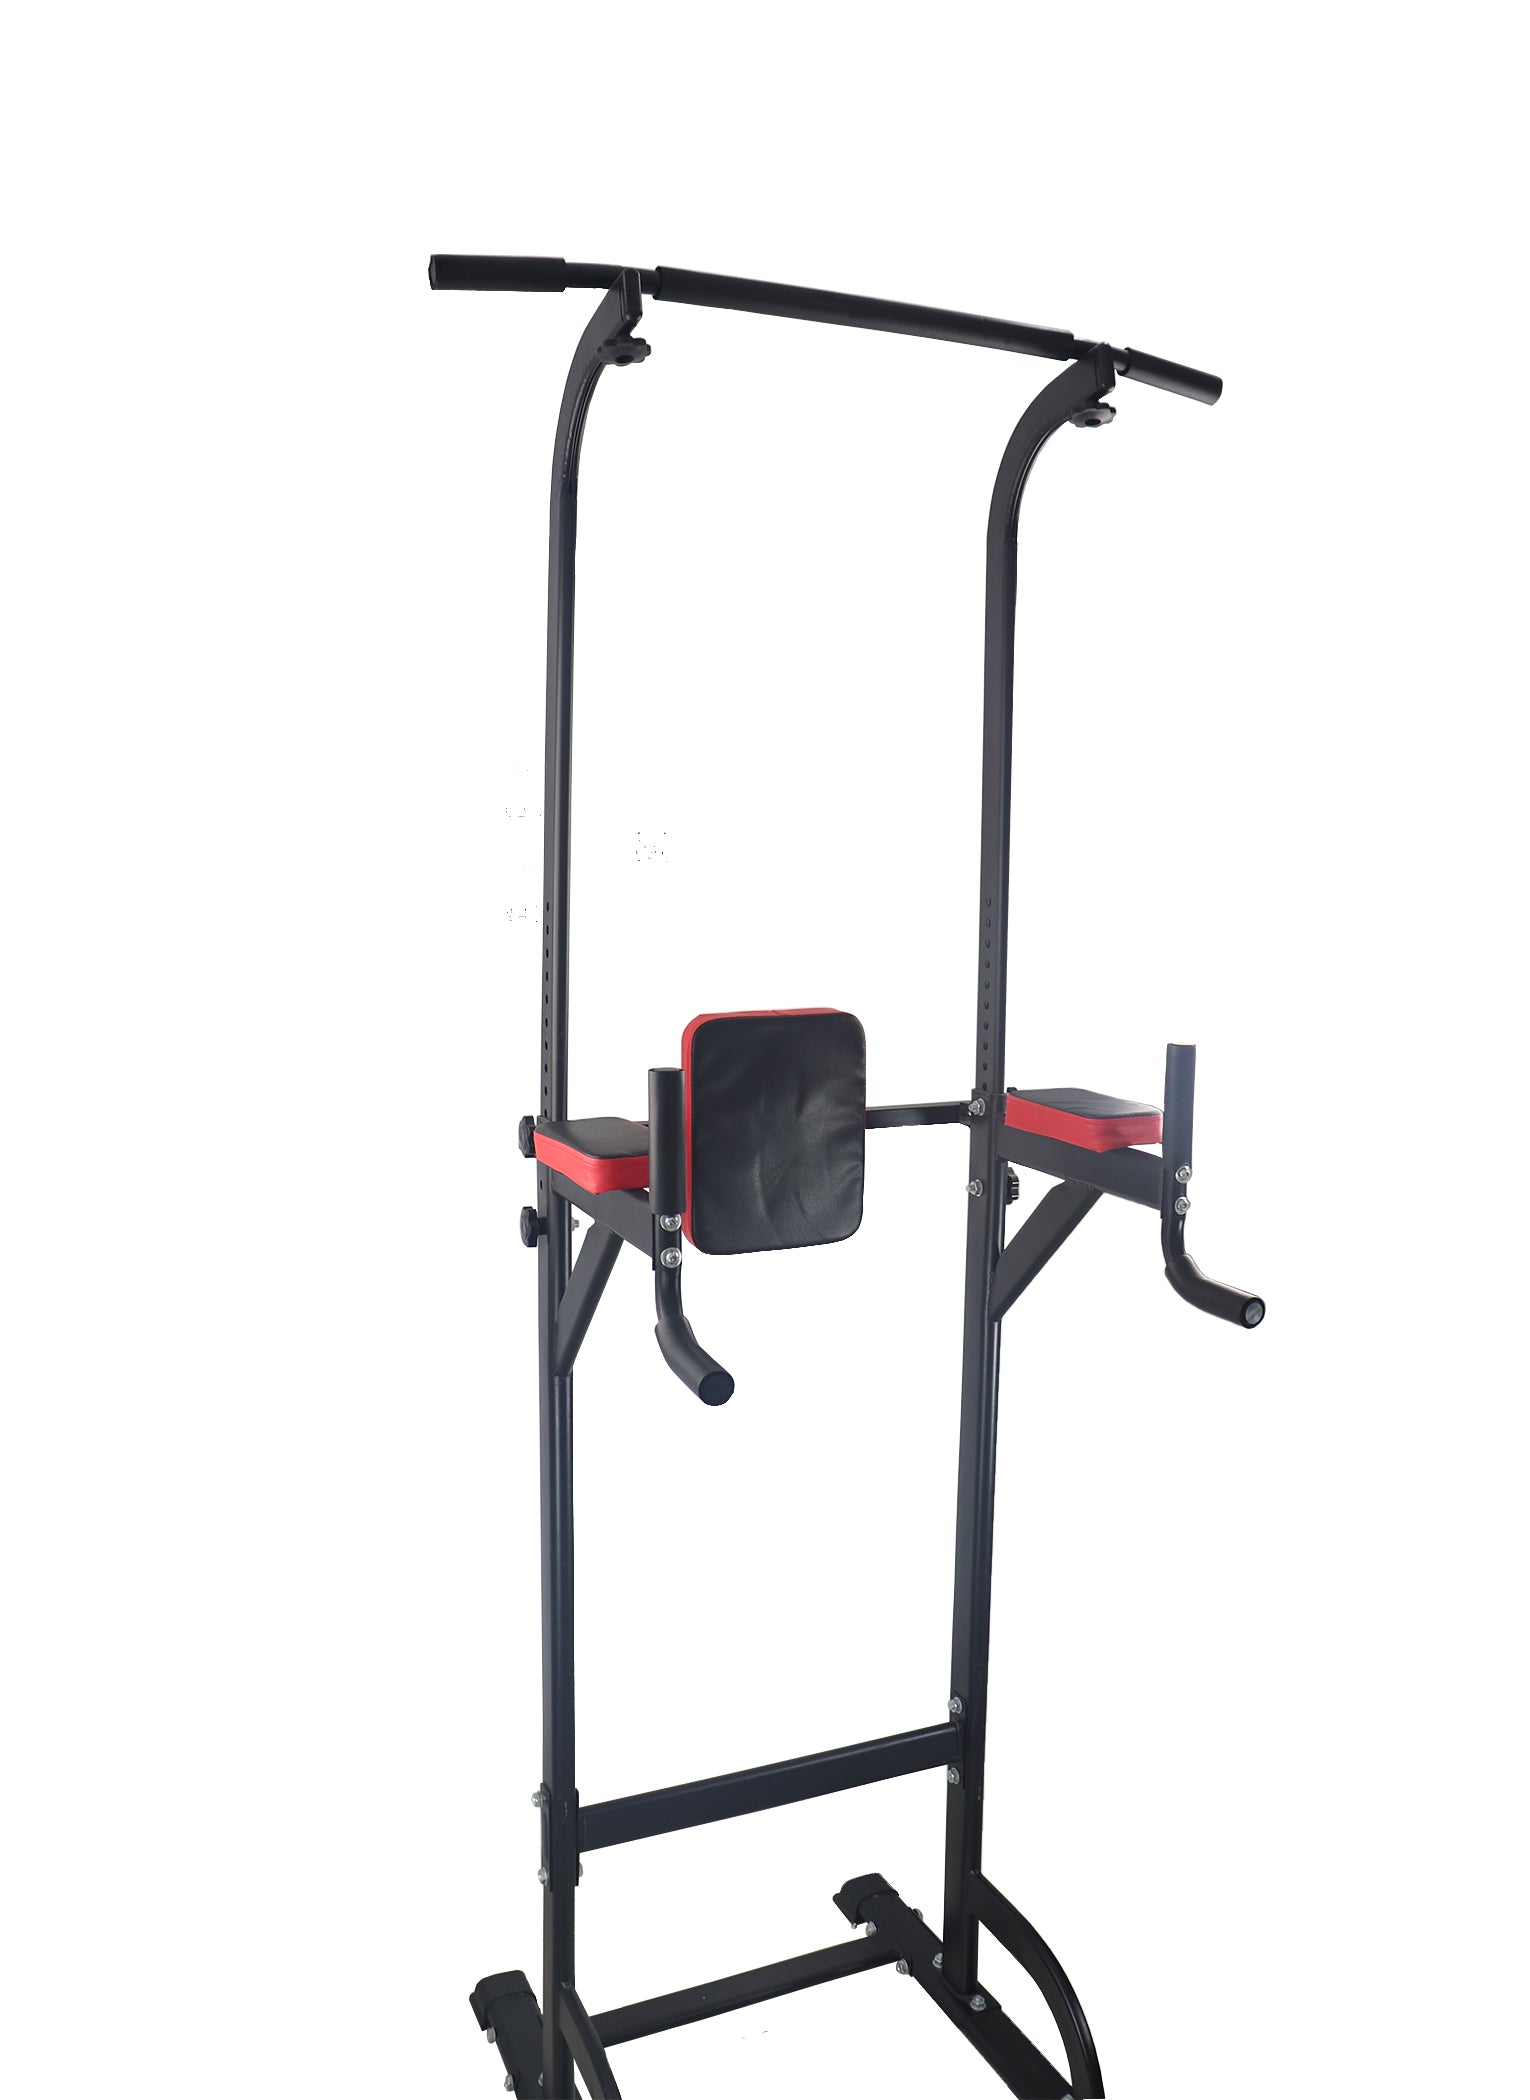 Marshal Fitness Home Gym JX-DS913